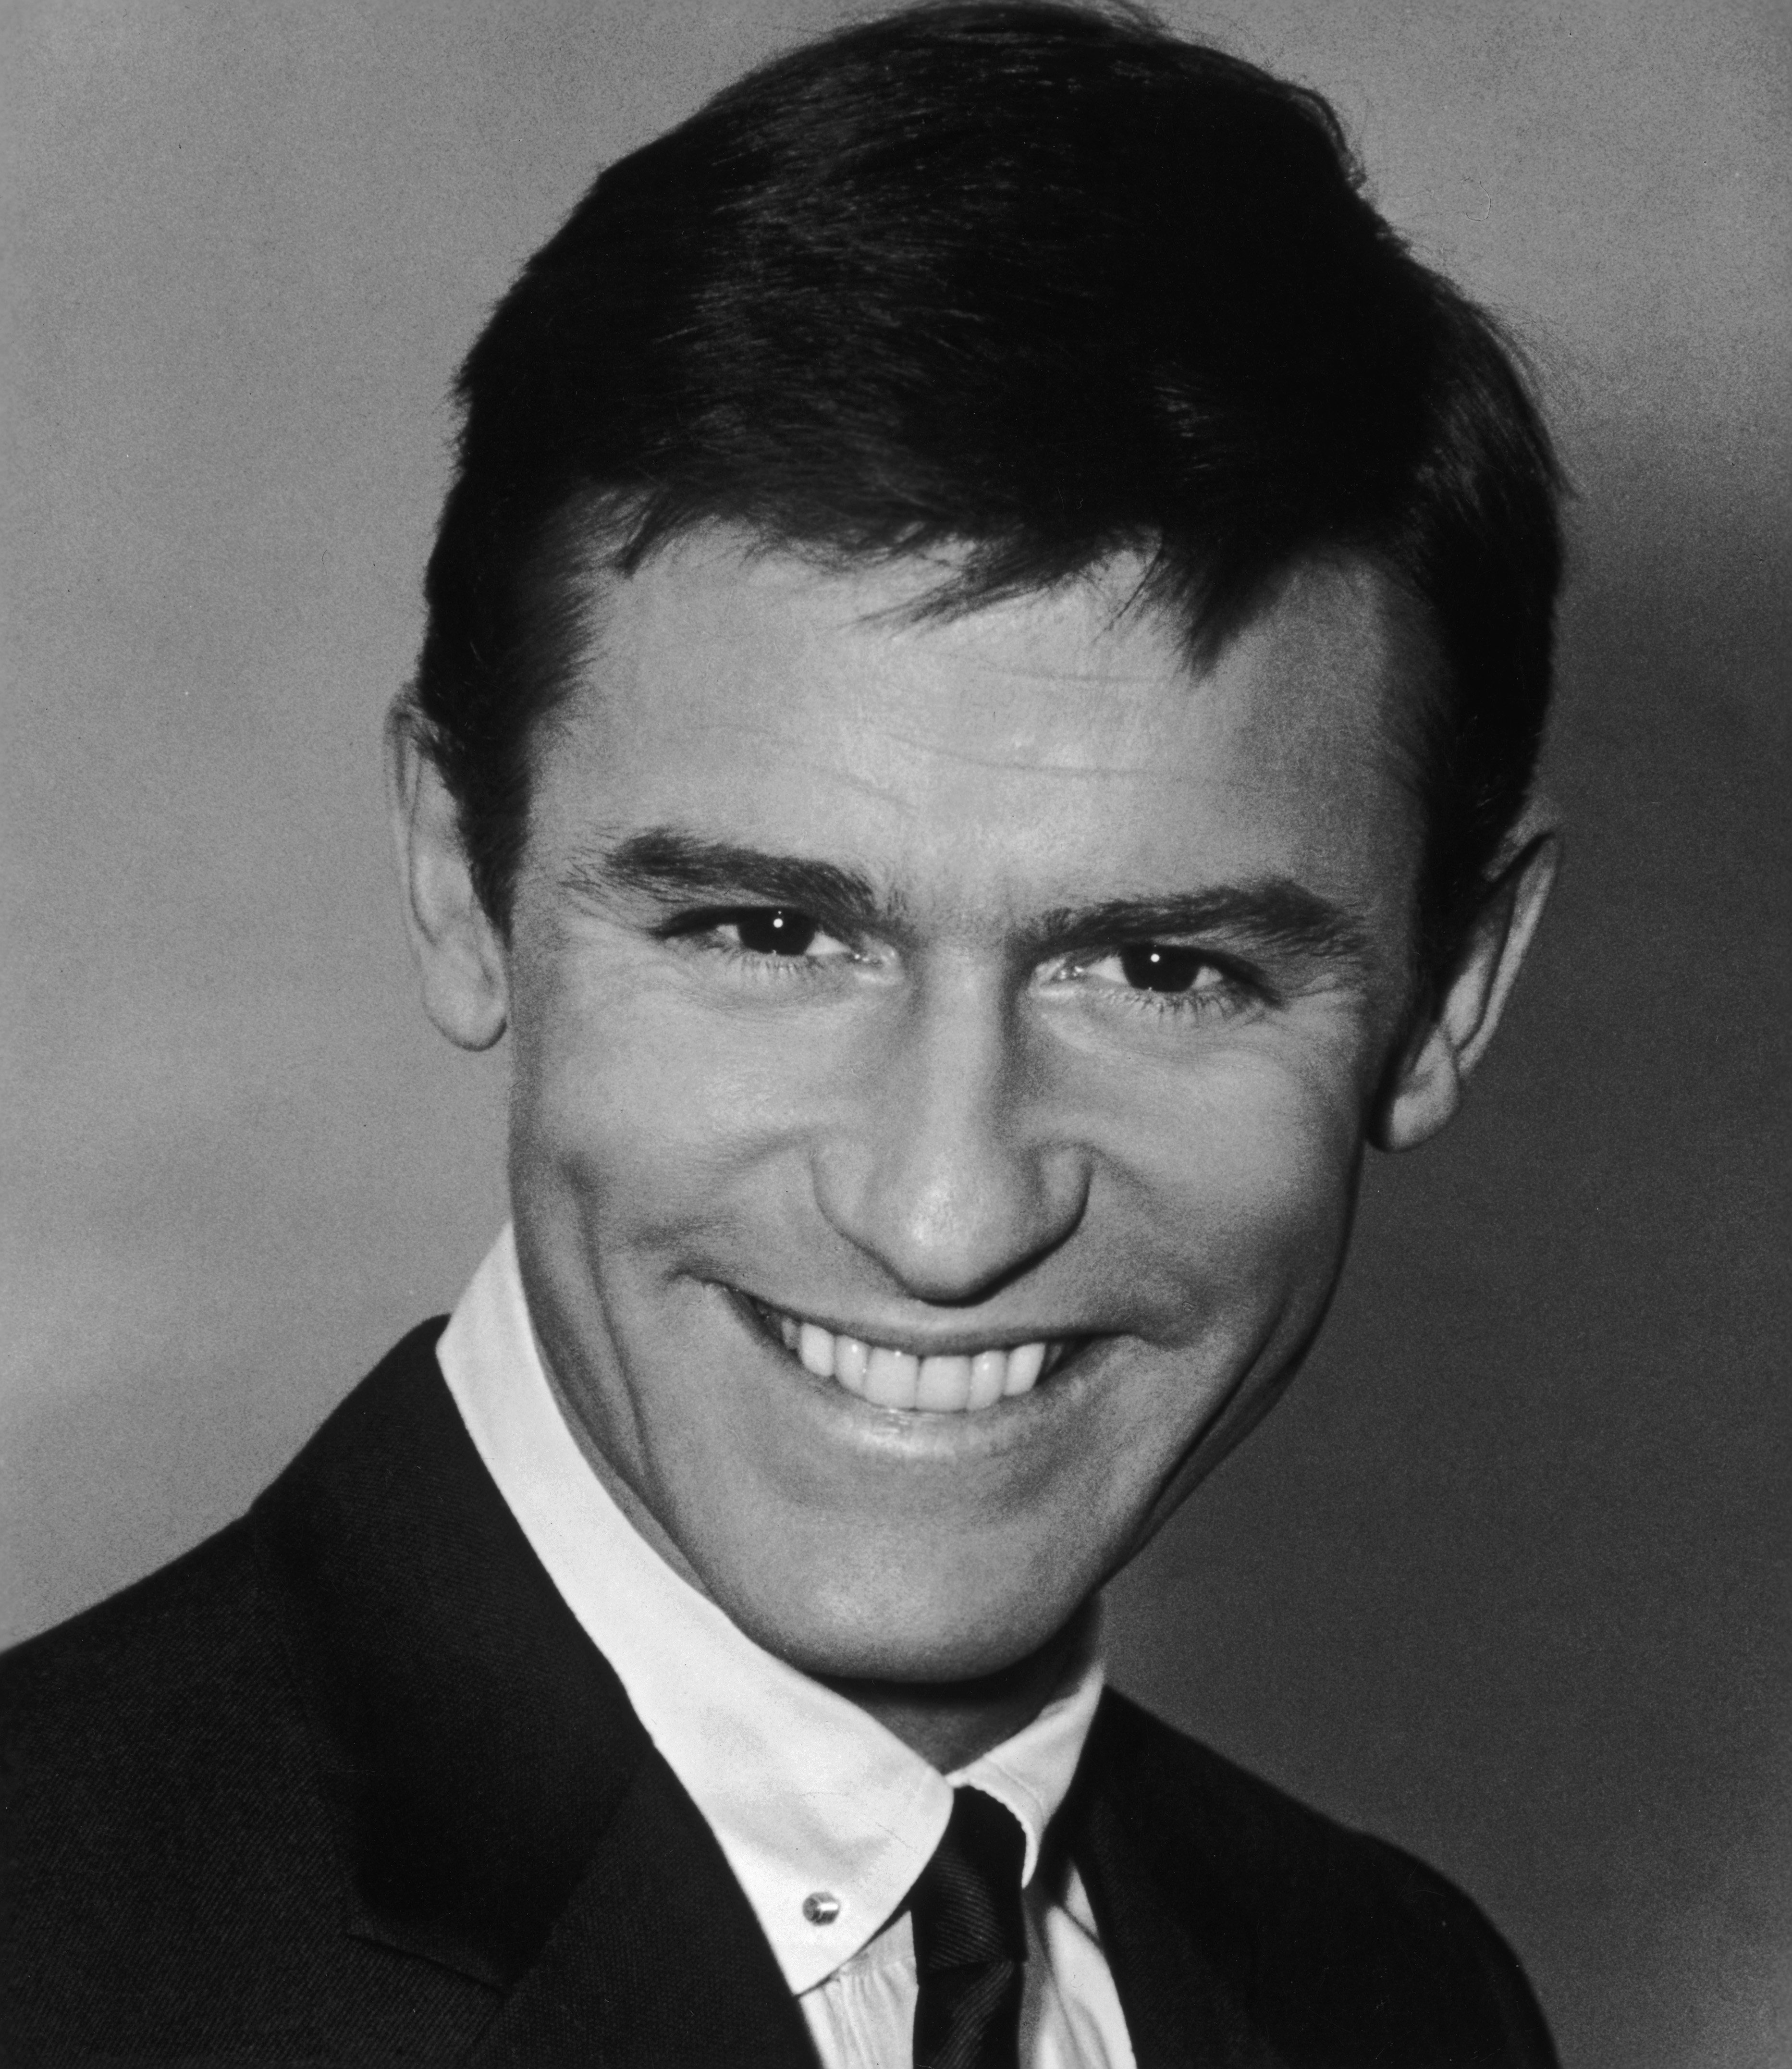 Roddy McDowall (1928 - 1998) in a headshot for the film 'That Darn Cat!'